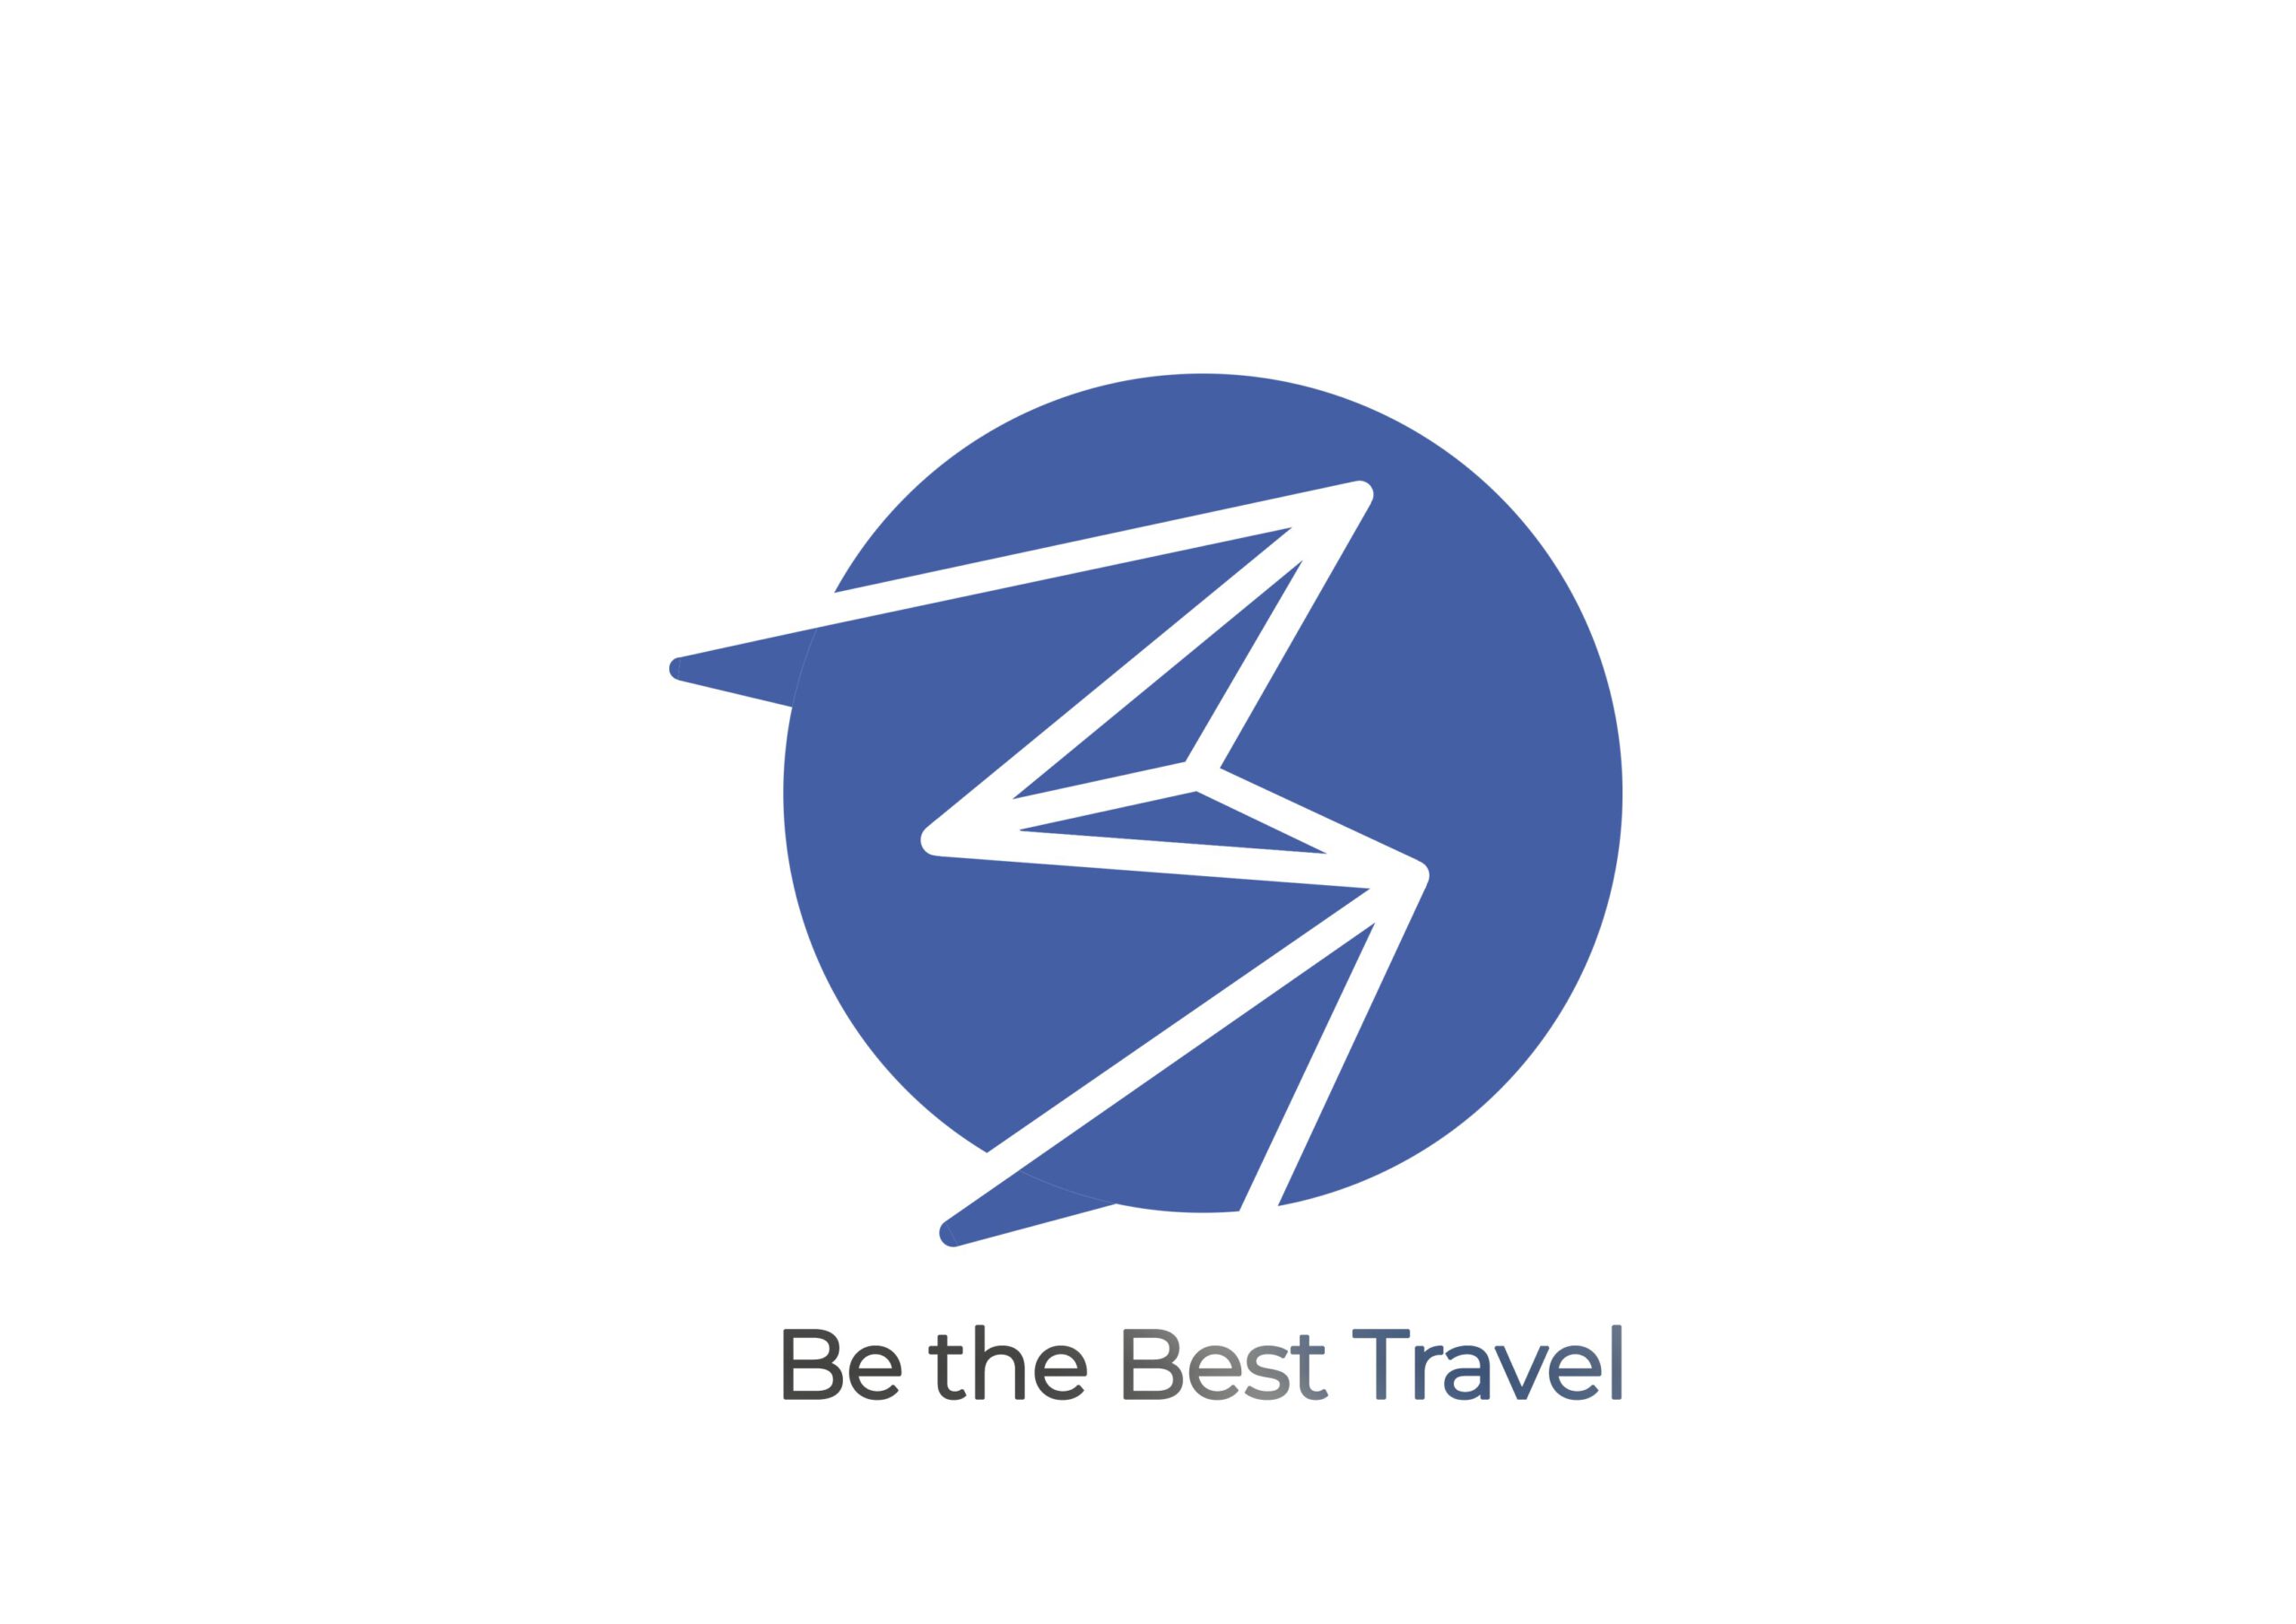 Be the Best Travel